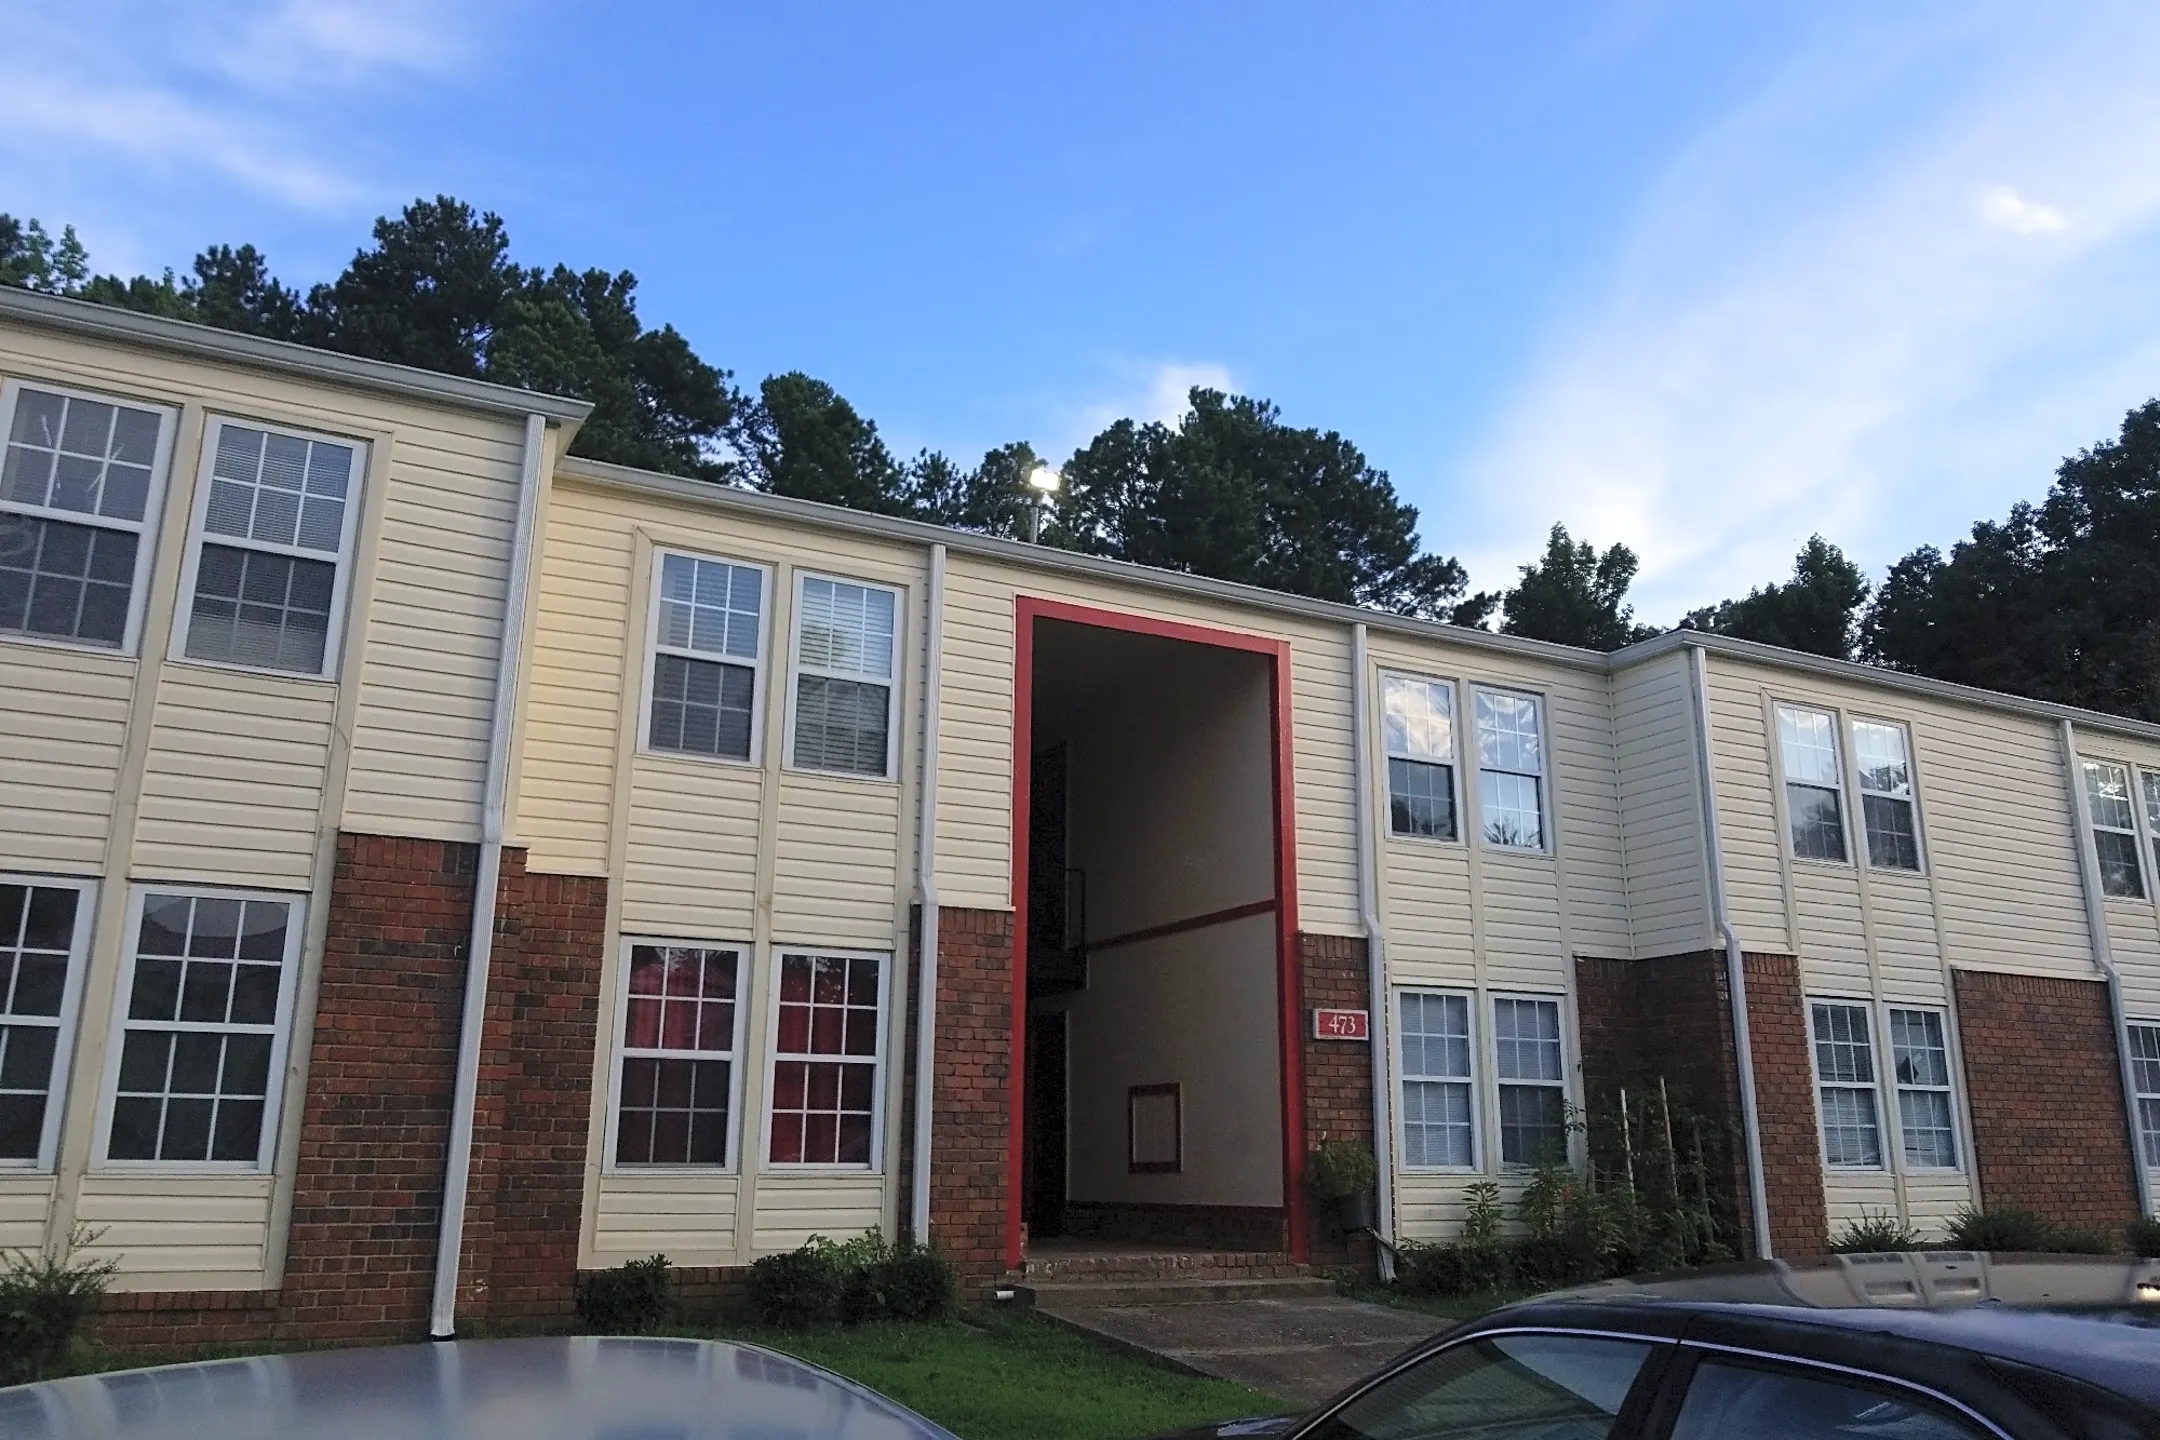 Pool - Deauville Apartments - Lawrenceville, GA